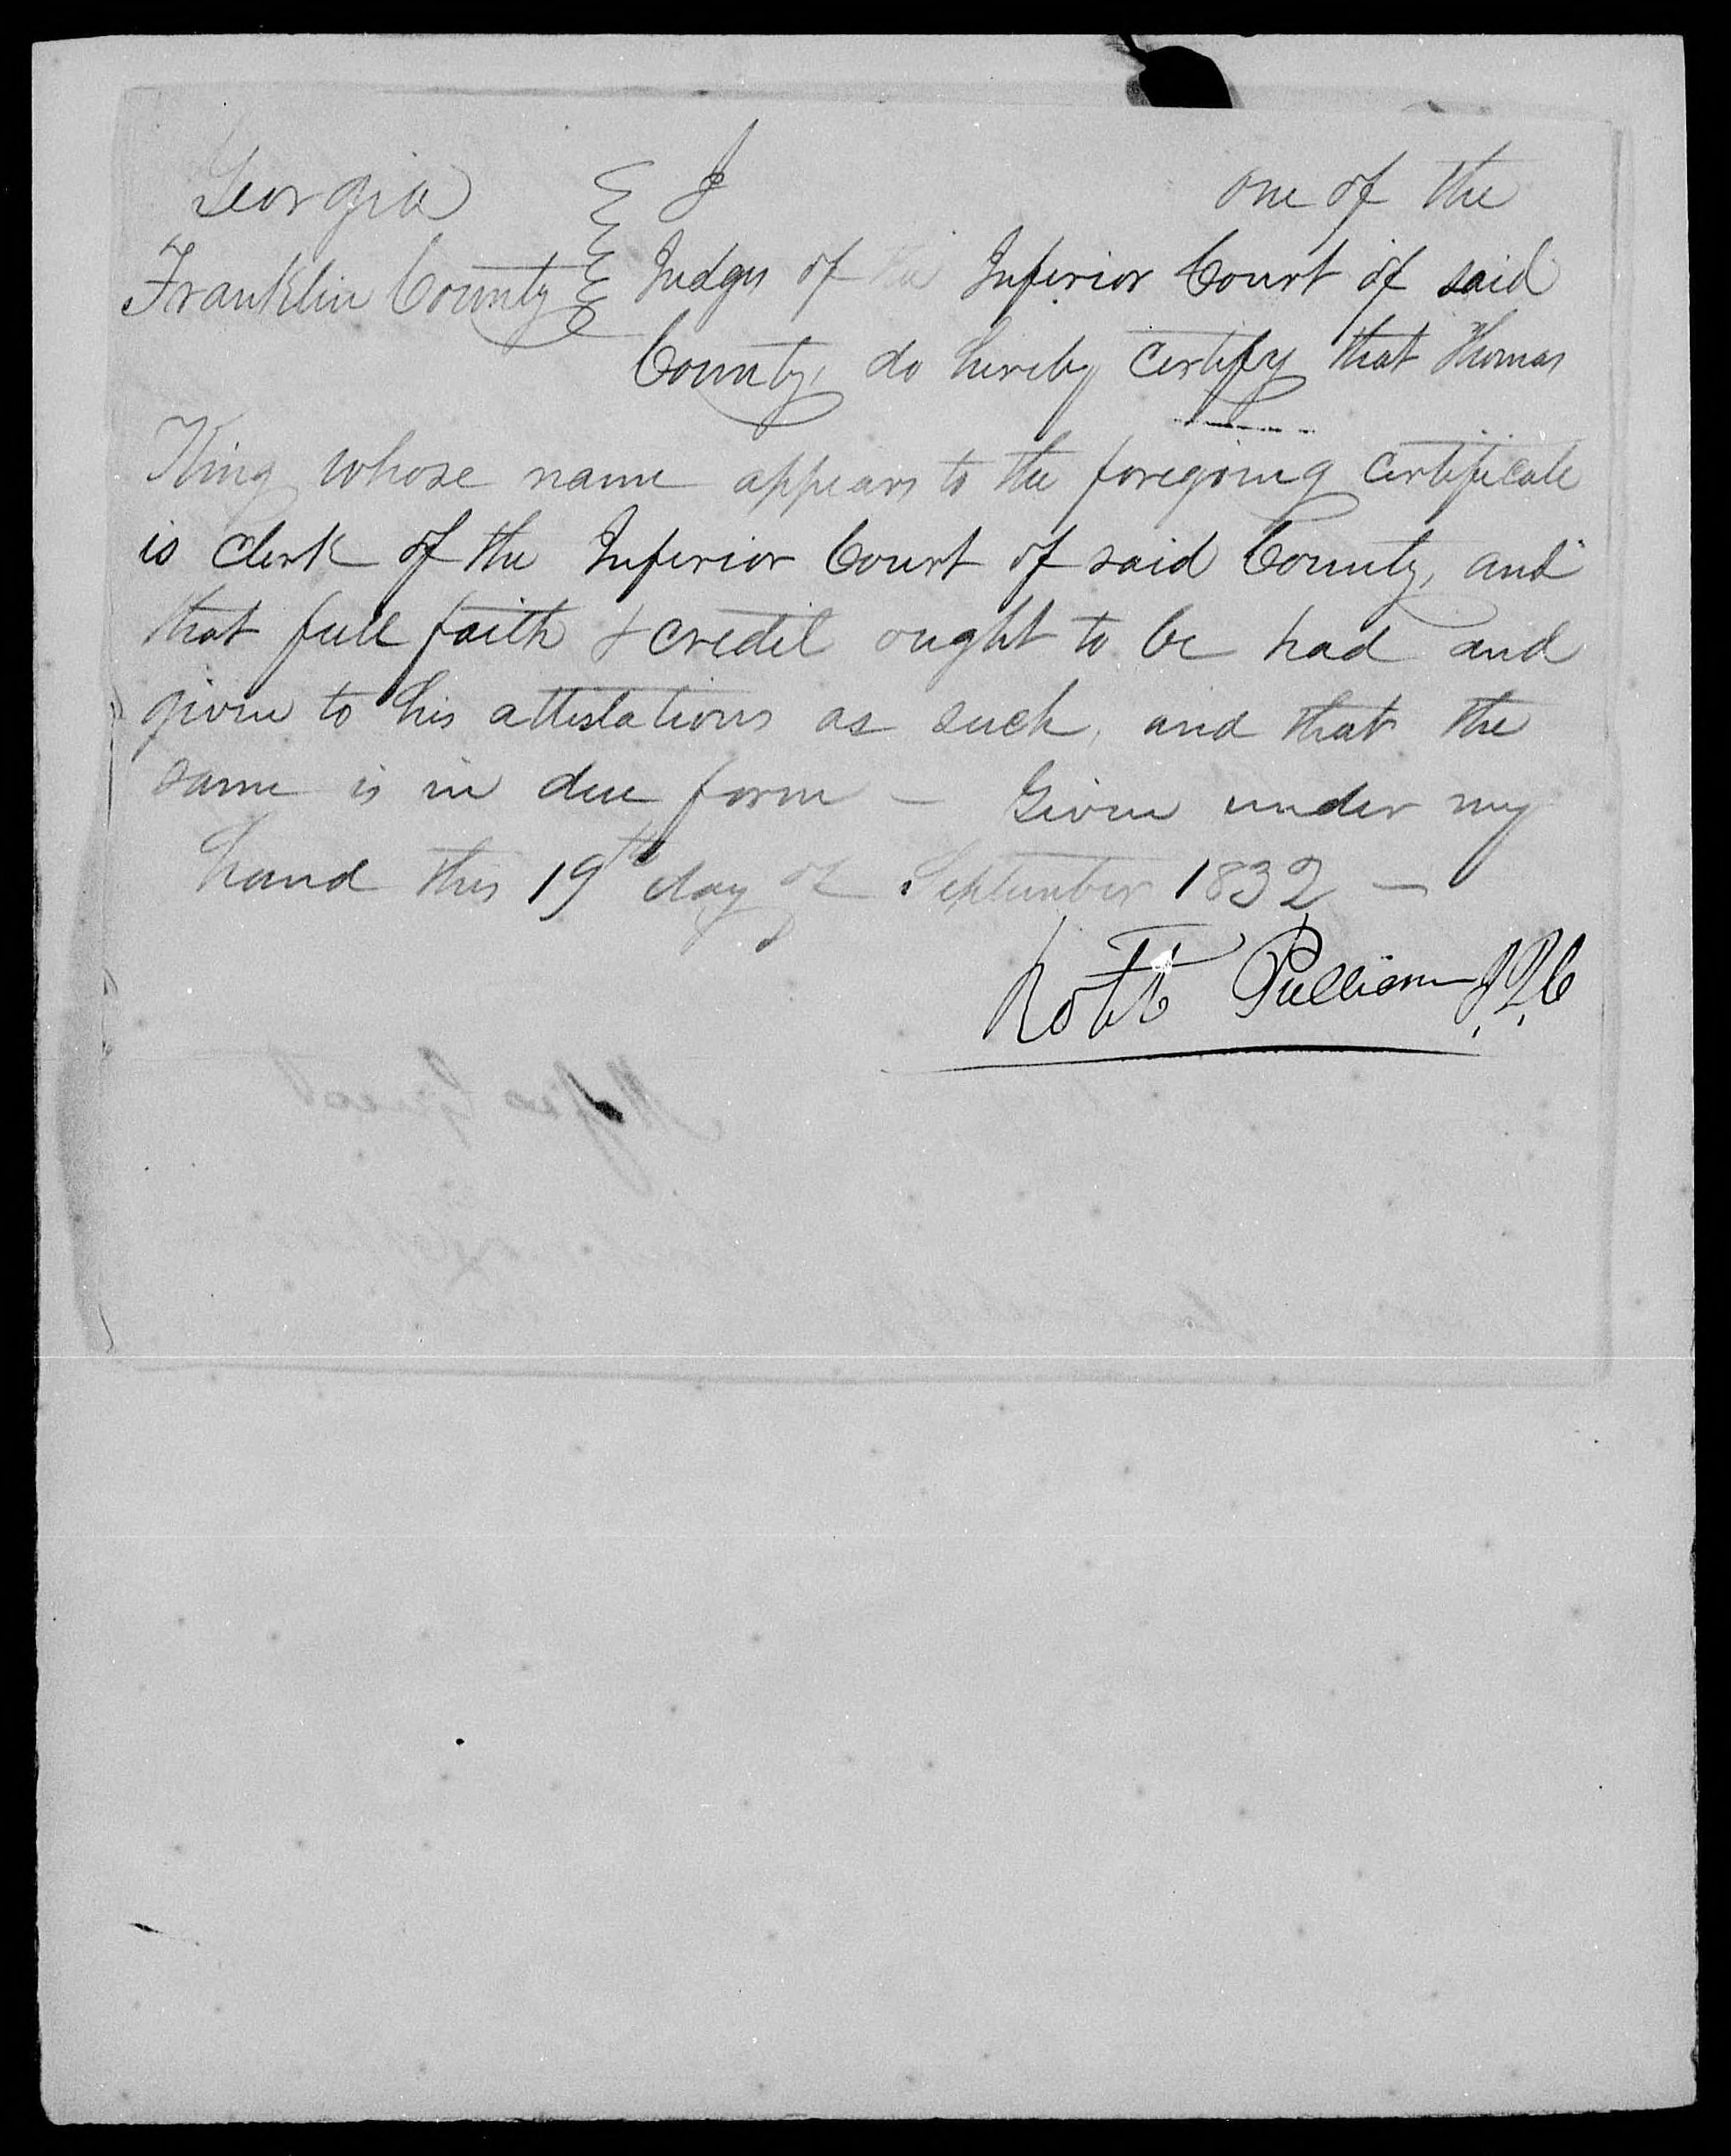 Affidavit of Moses Guest and Thompson Epperson in support of a Pension Claim for William Guest, 18 September 1832, page 2